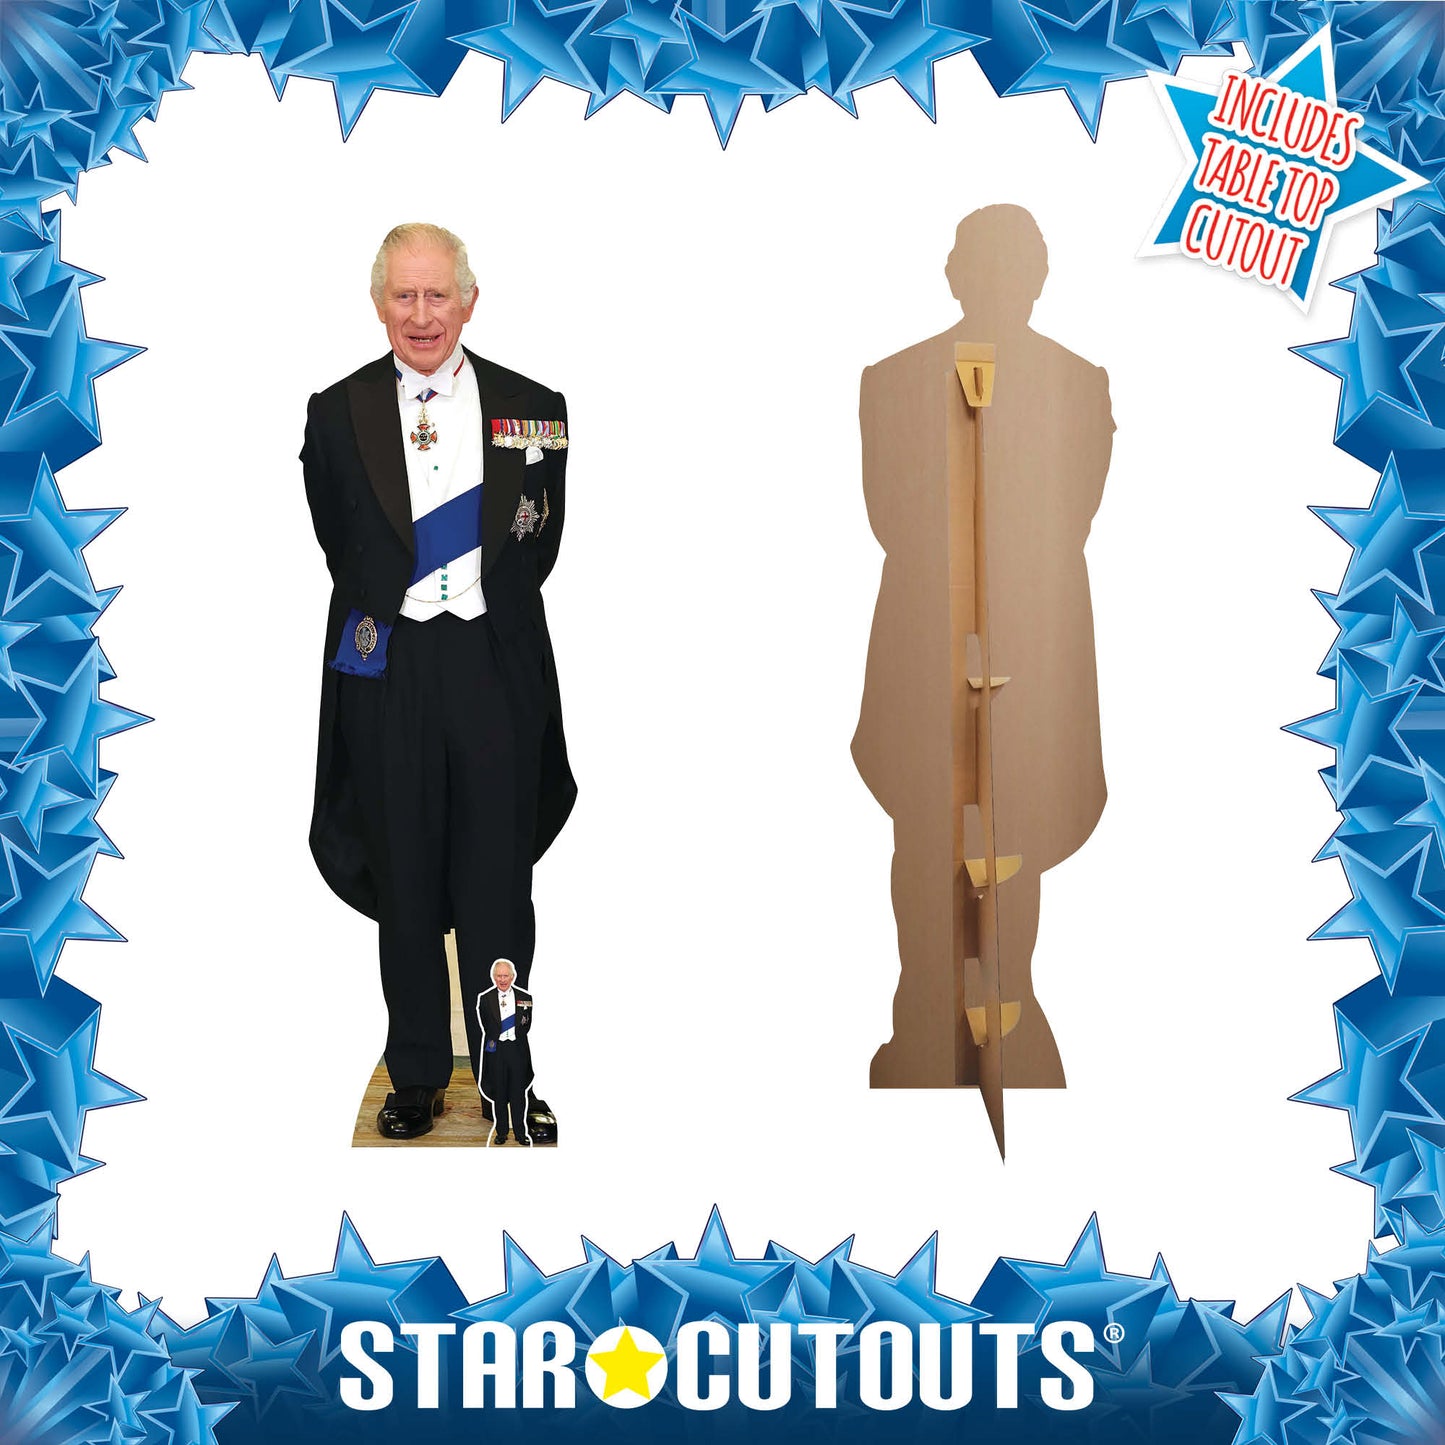 King Charles with Medals Cardboard Cutout